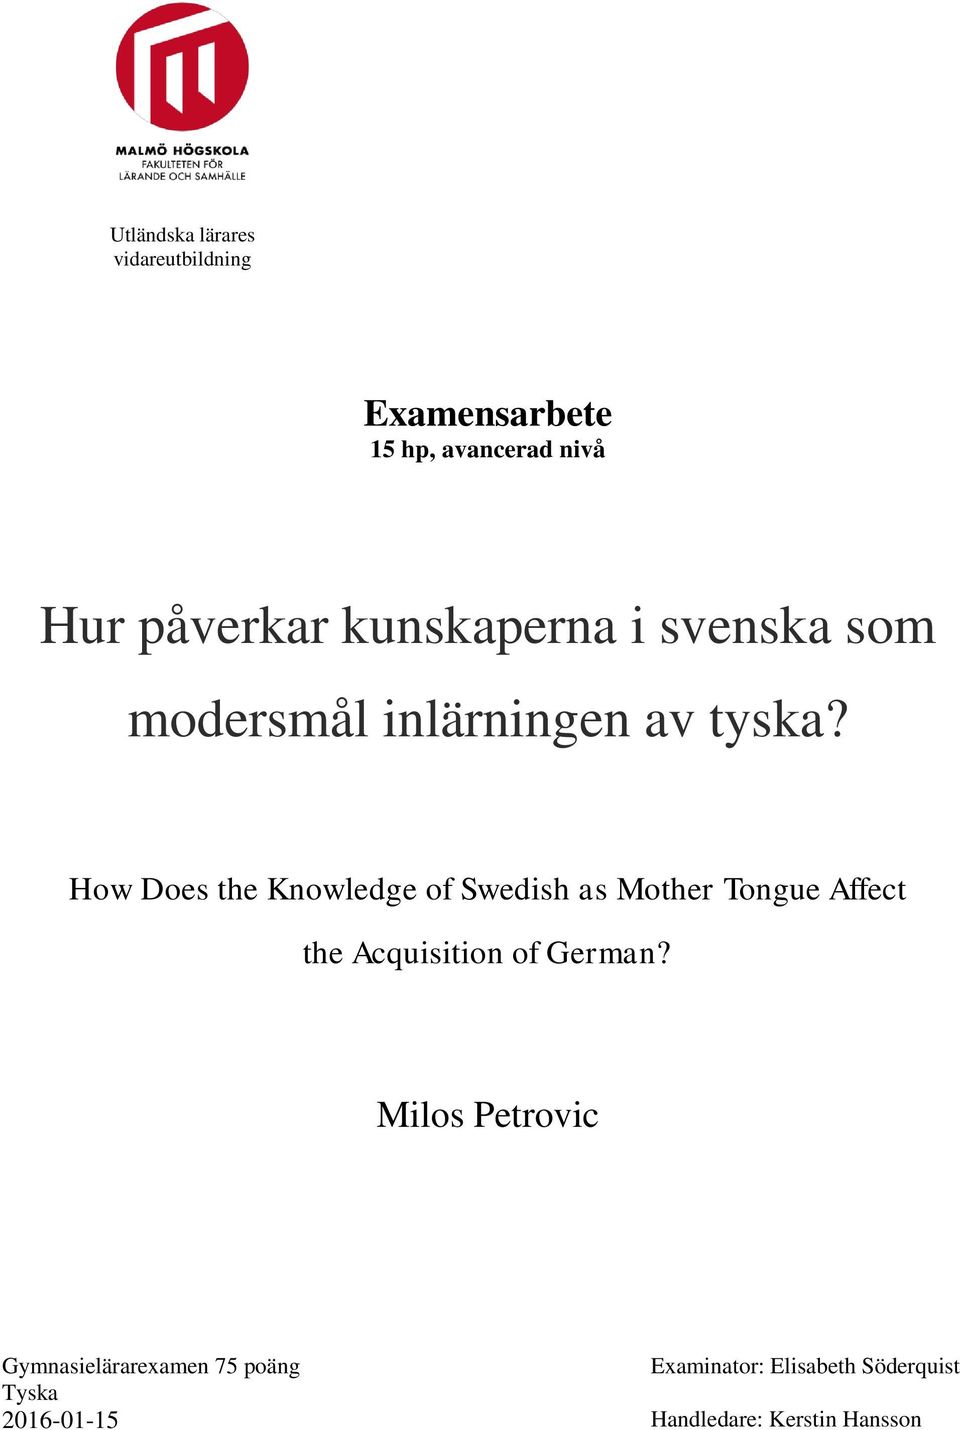 How Does the Knowledge of Swedish as Mother Tongue Affect the Acquisition of German?